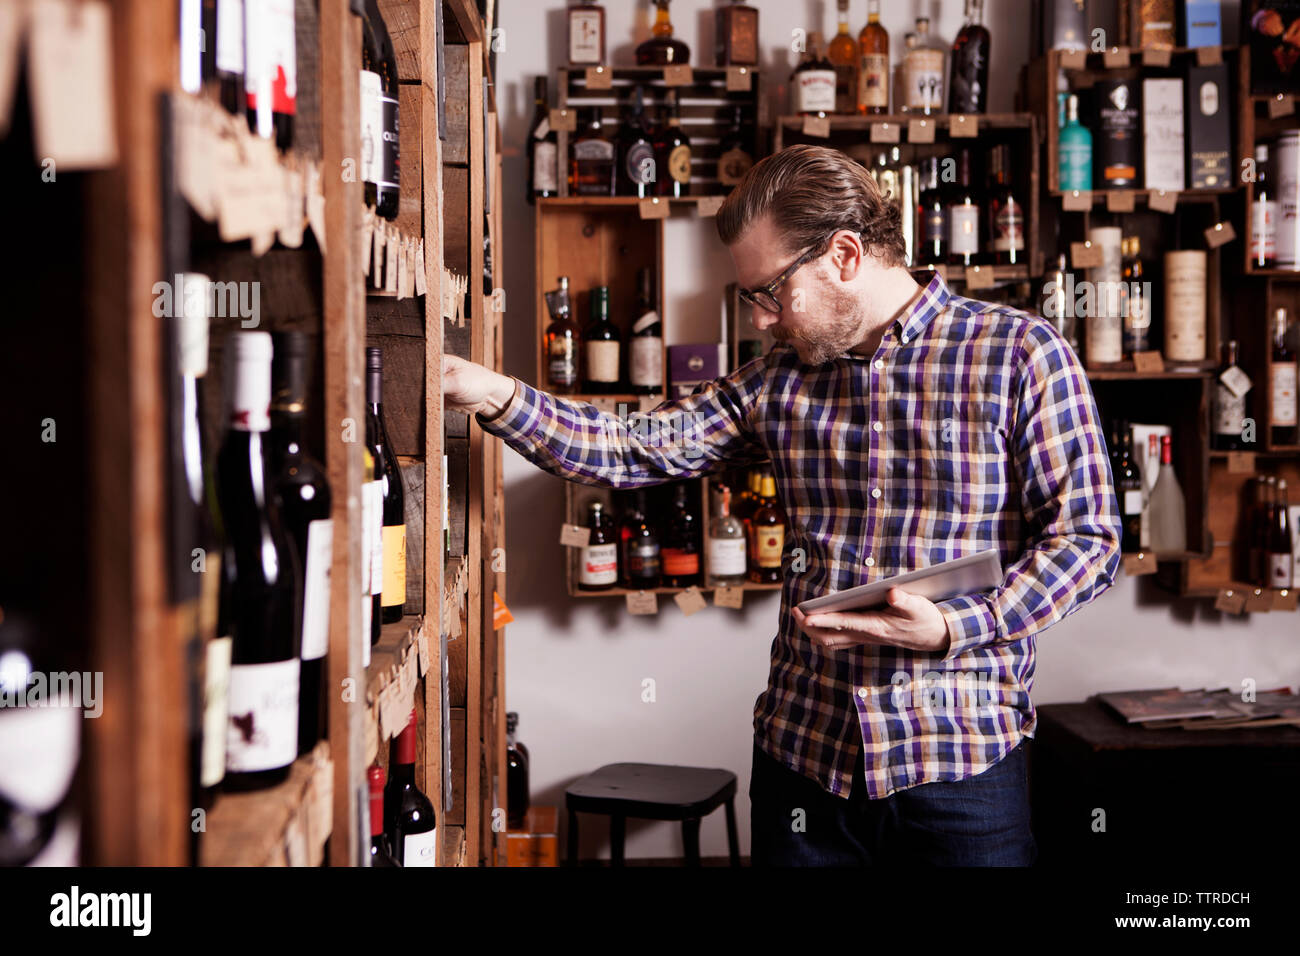 Male small business owner examining wine bottle while holding tablet computer in shop Stock Photo